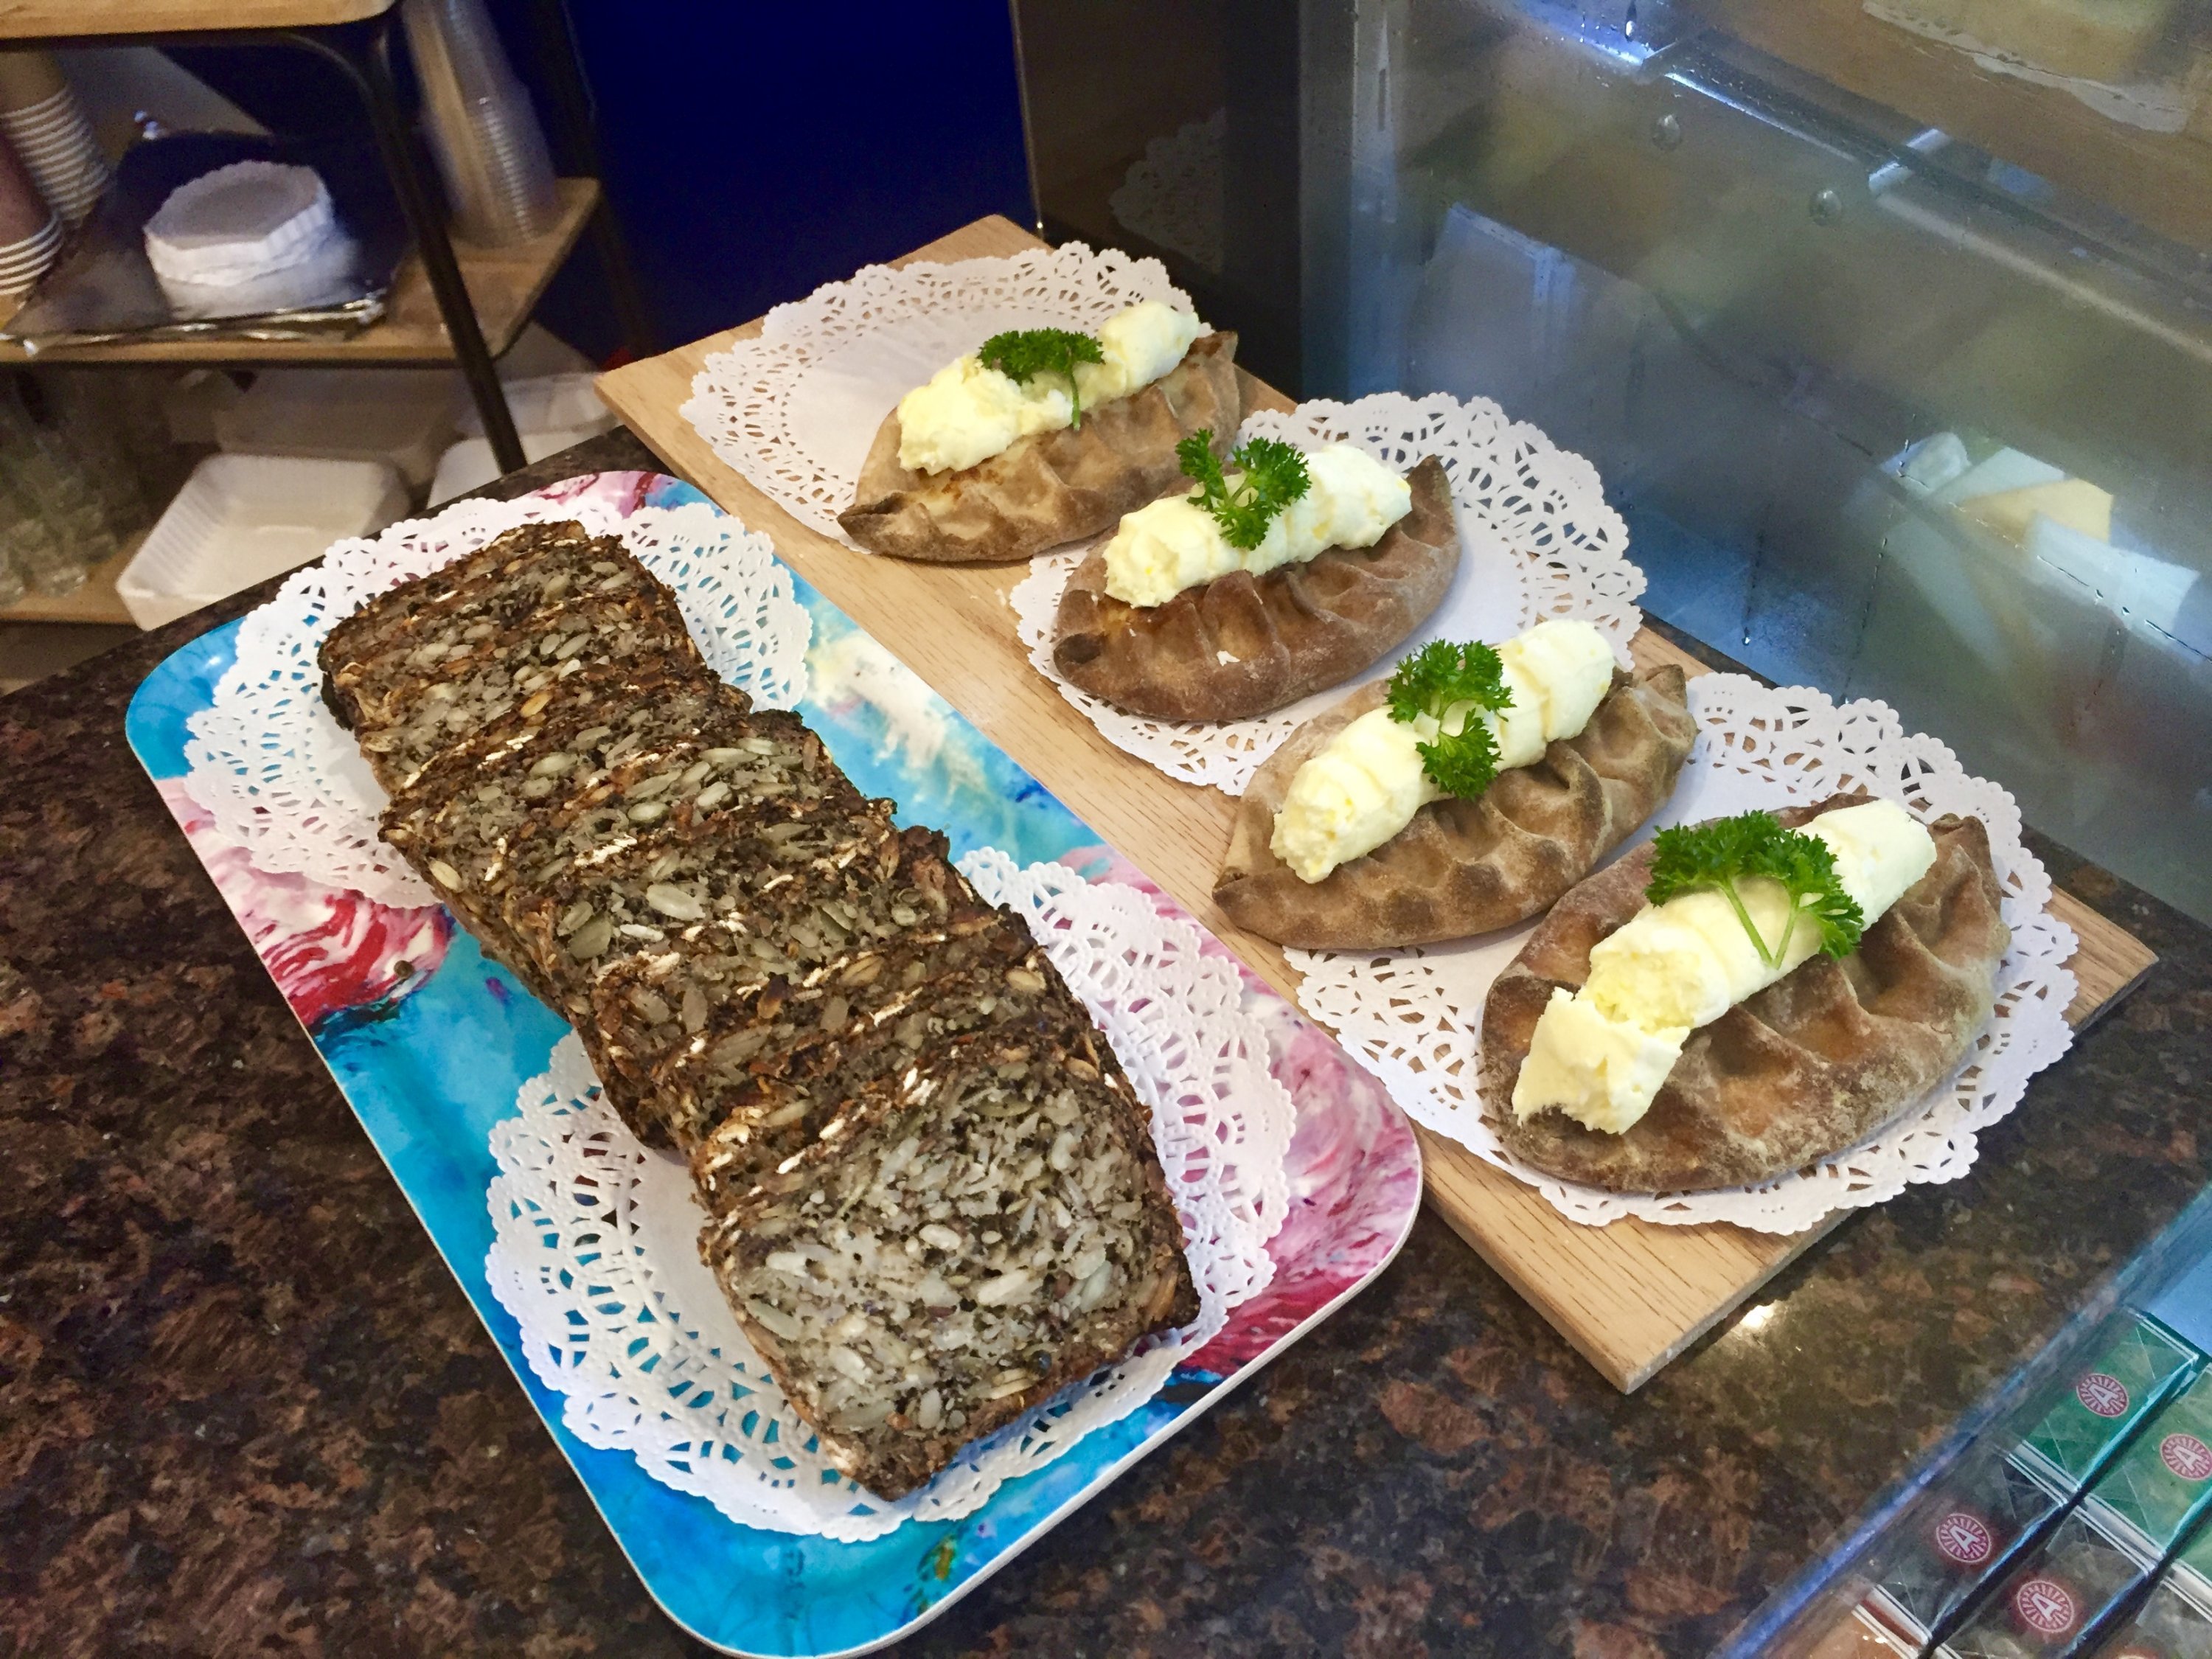 The café serves various Nordic pastries and breads, such as seven seed bread (left) and Karelian pastries topped with egg butter and filled with rice porridge (right). Photograph by Helen Carefoot.